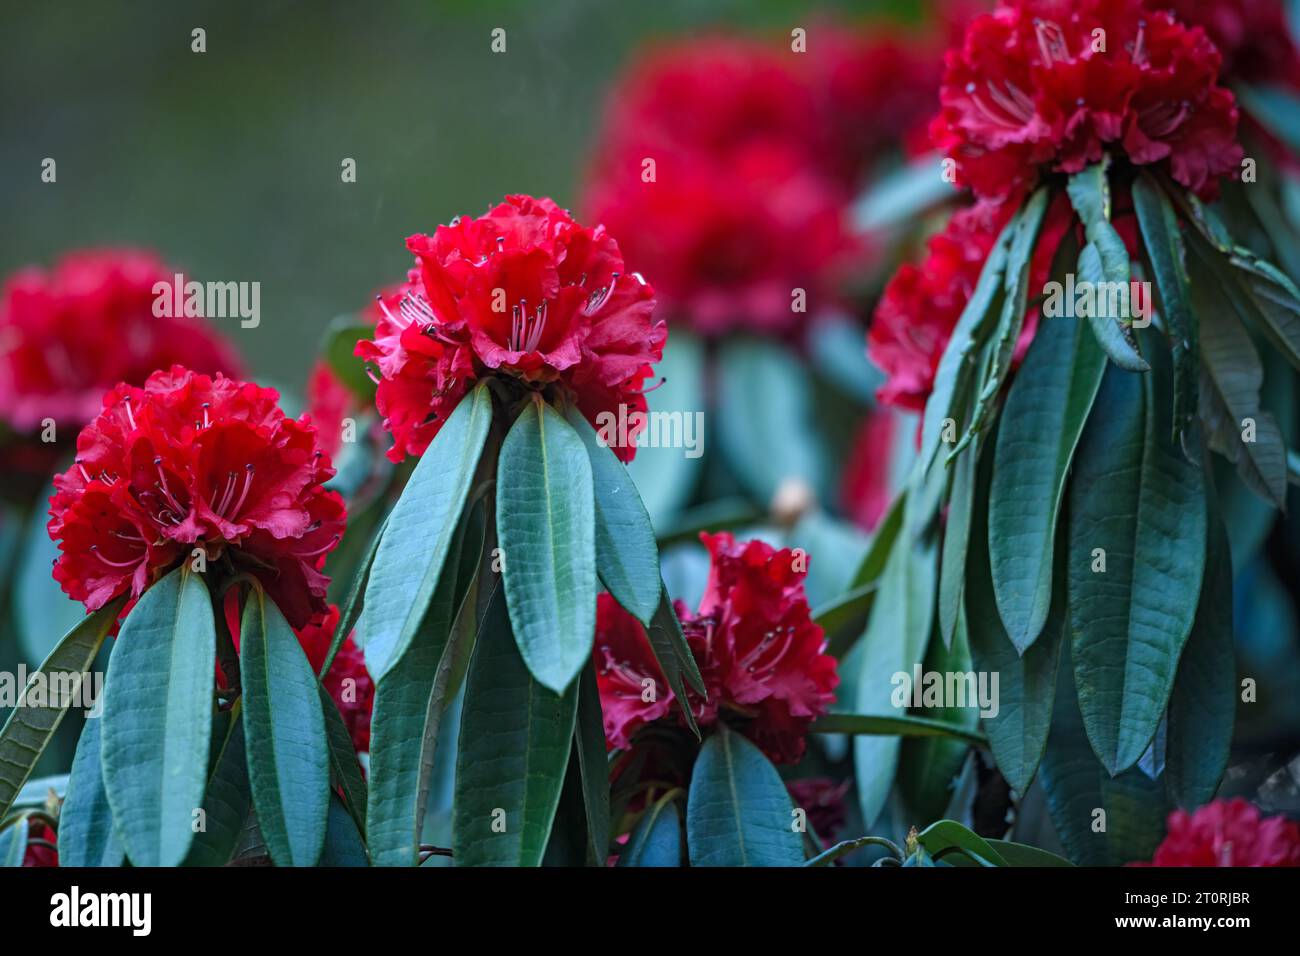 Close-up of rhododendron flowers in full bloom Stock Photo